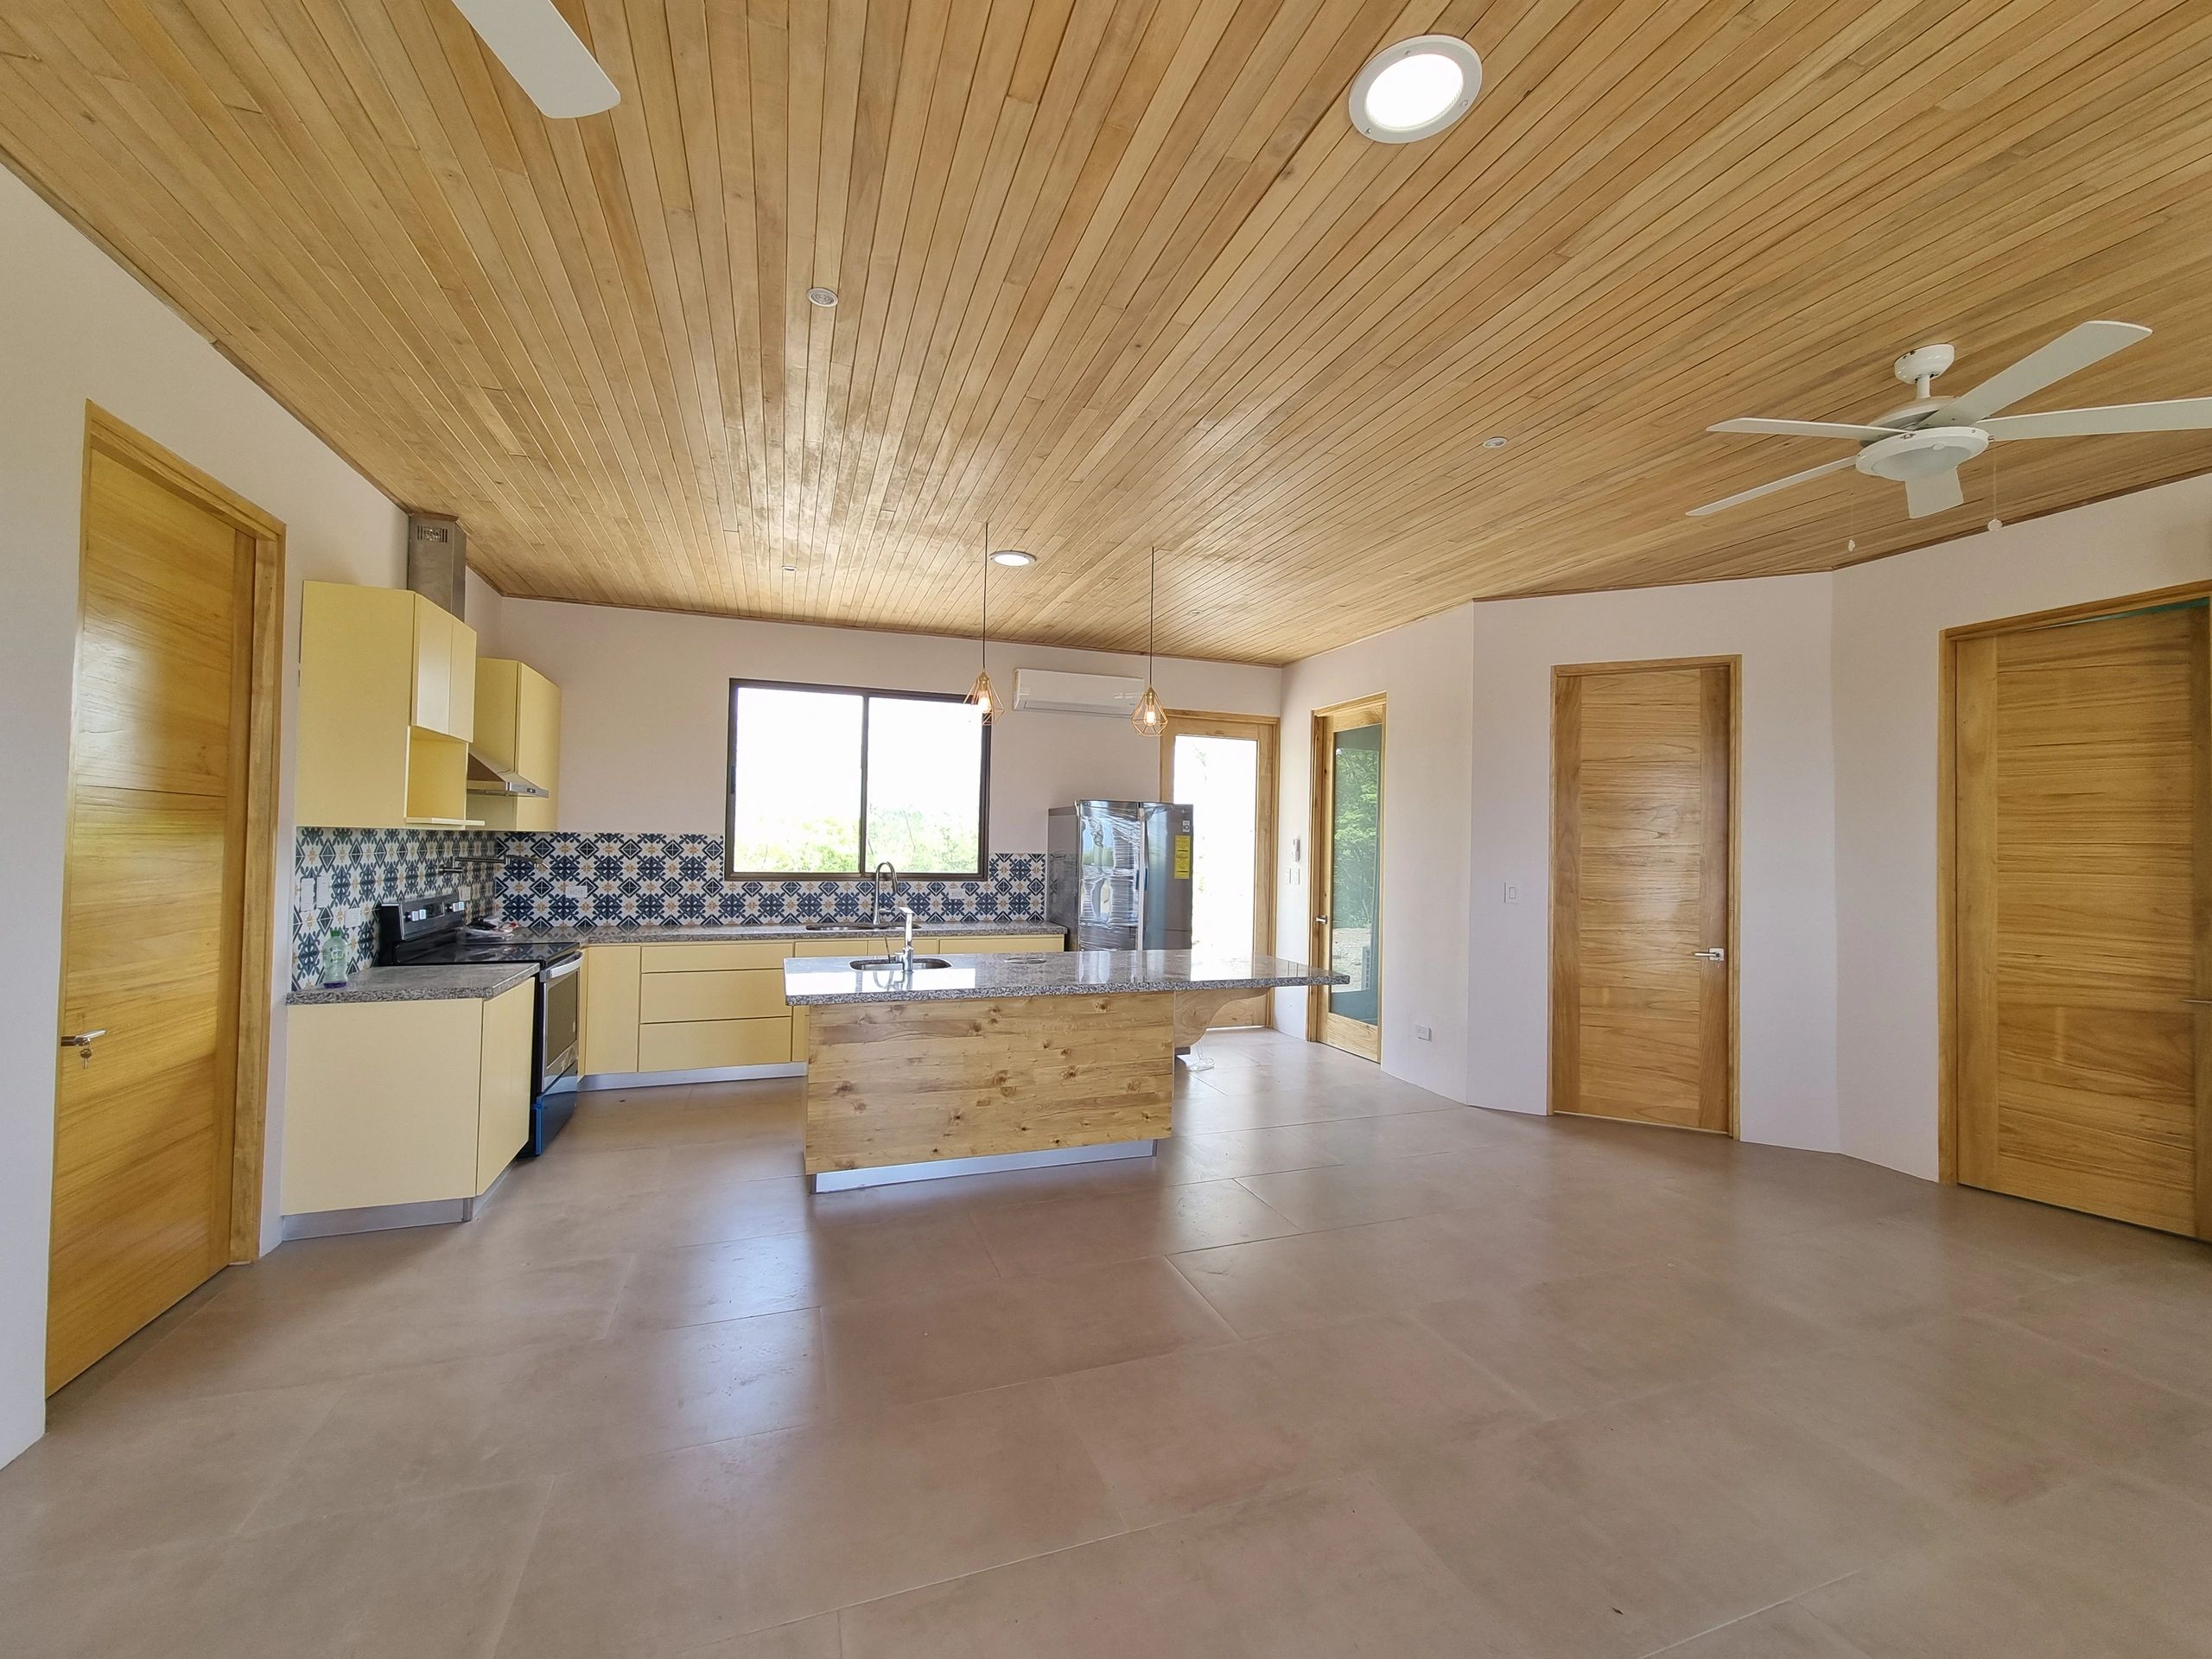 Kitchen, wood cabinets, granite countertops. Fan ceilings and A/C
Design Permitting Build Costa Rica